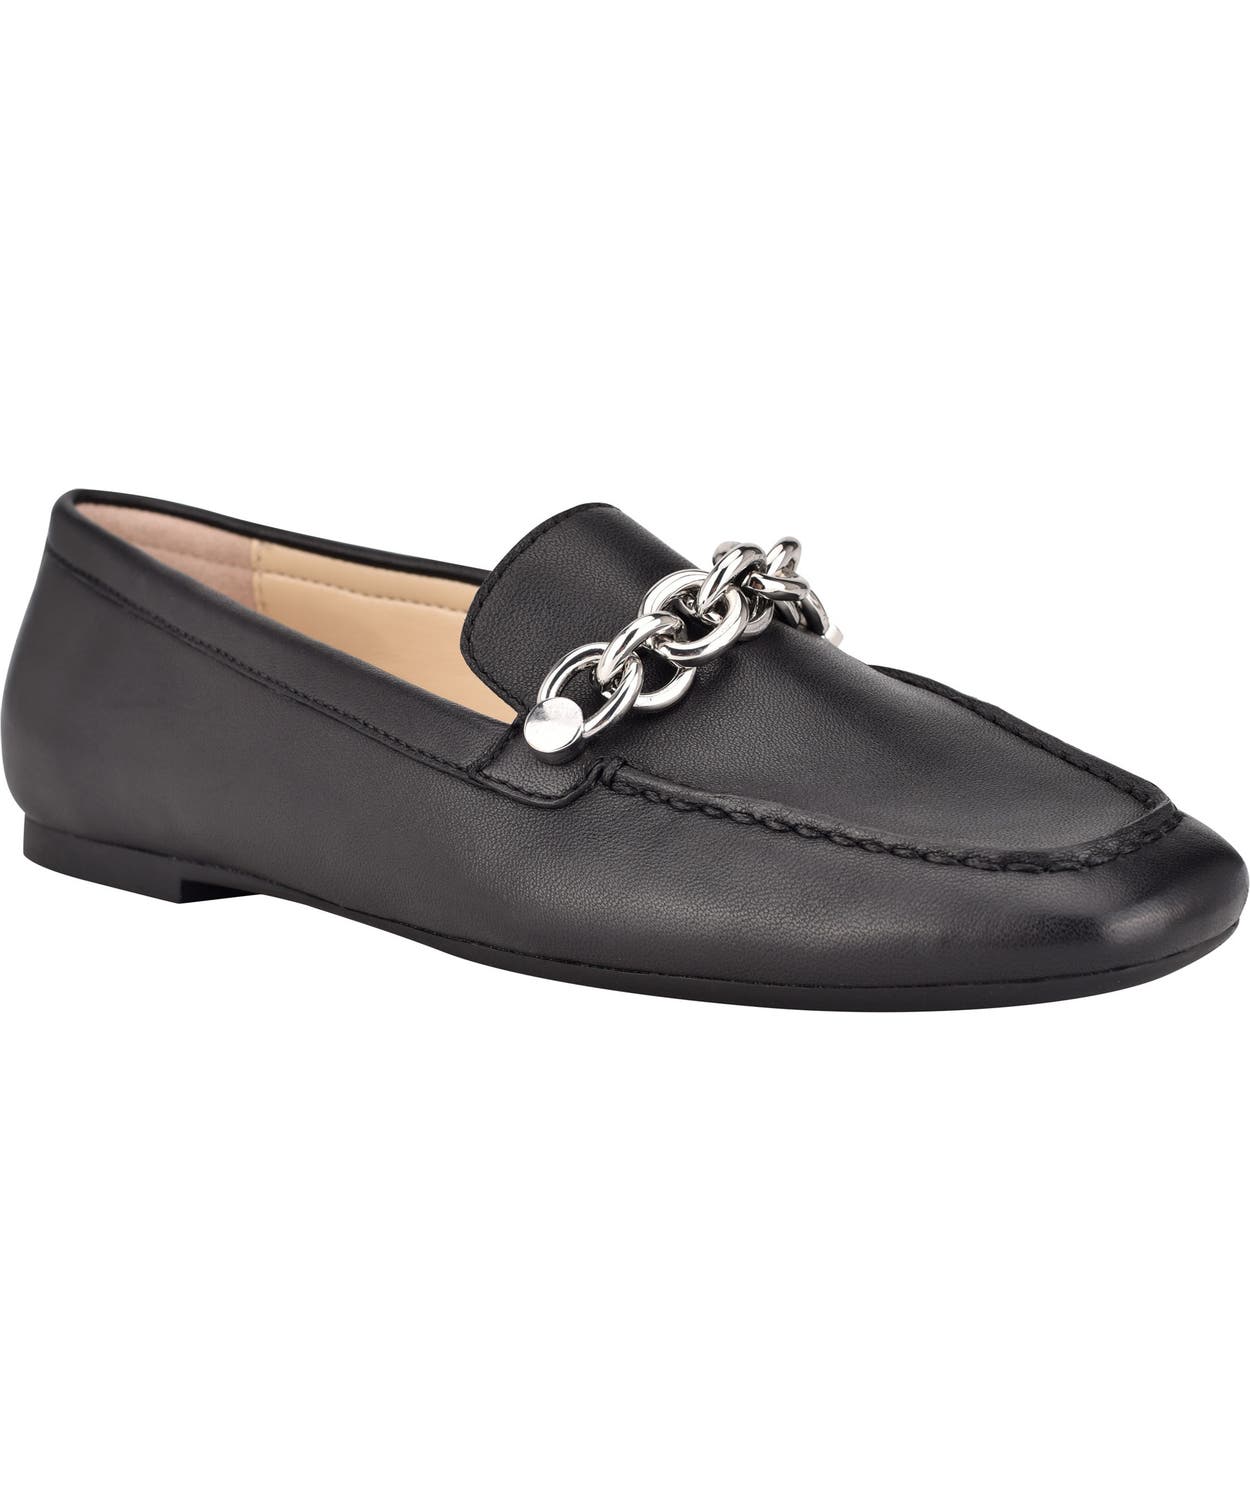 www.couturepoint.com-calvin-klein-womens-black-leather-elanna-chain-link-loafers